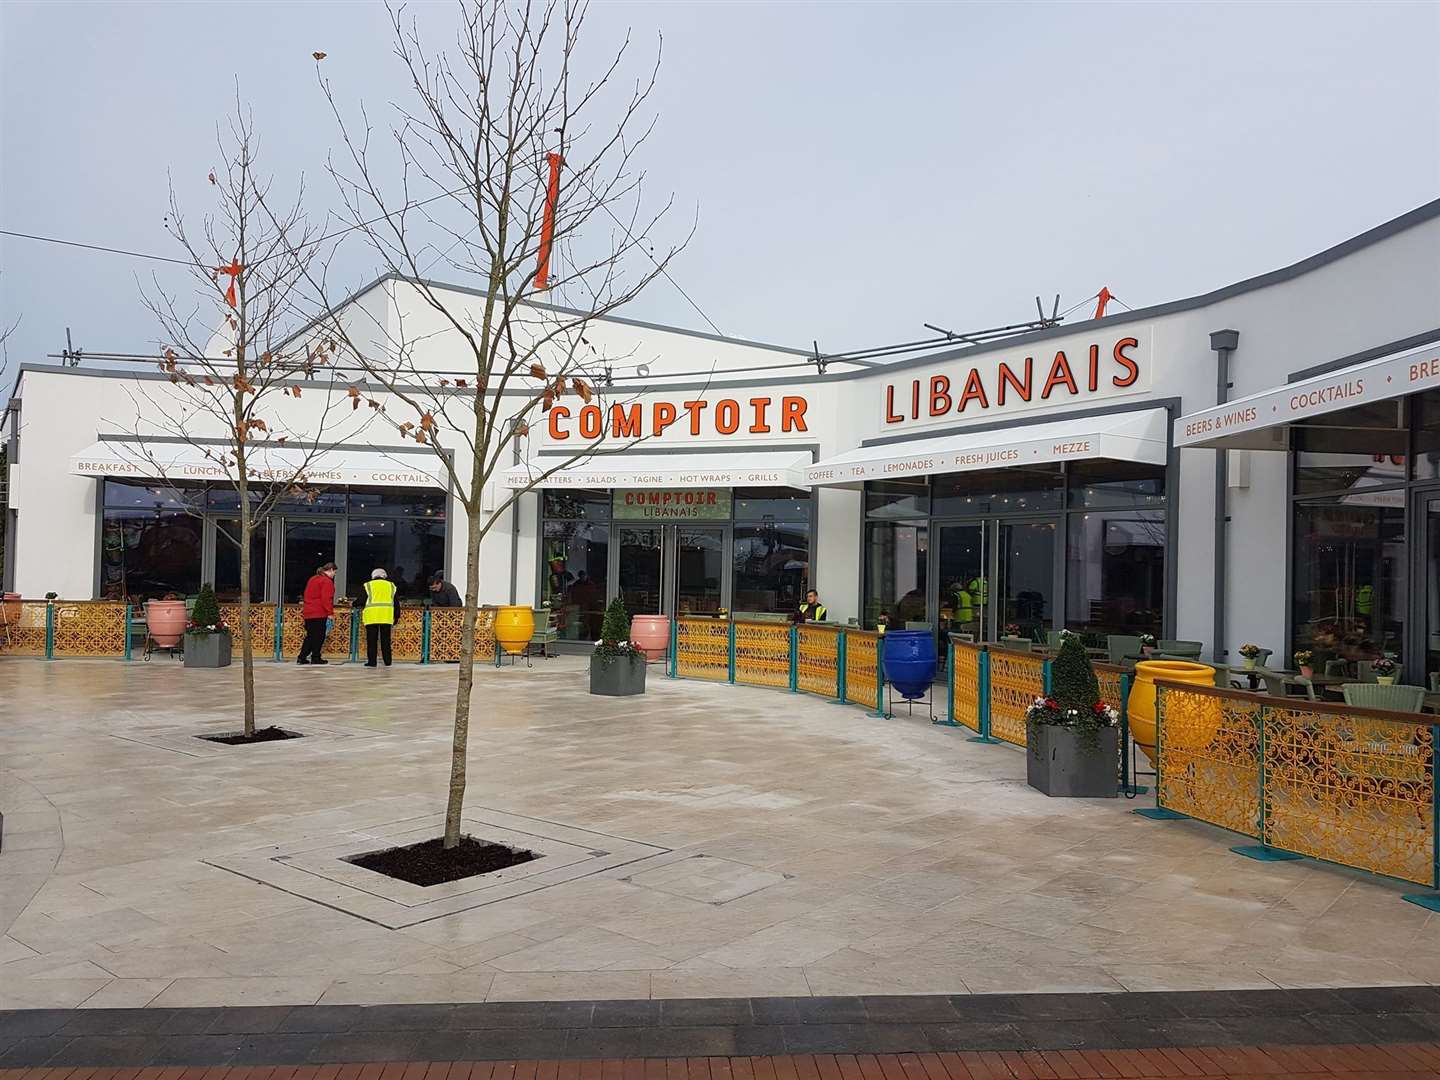 Comptoir Libanais is set to open this month